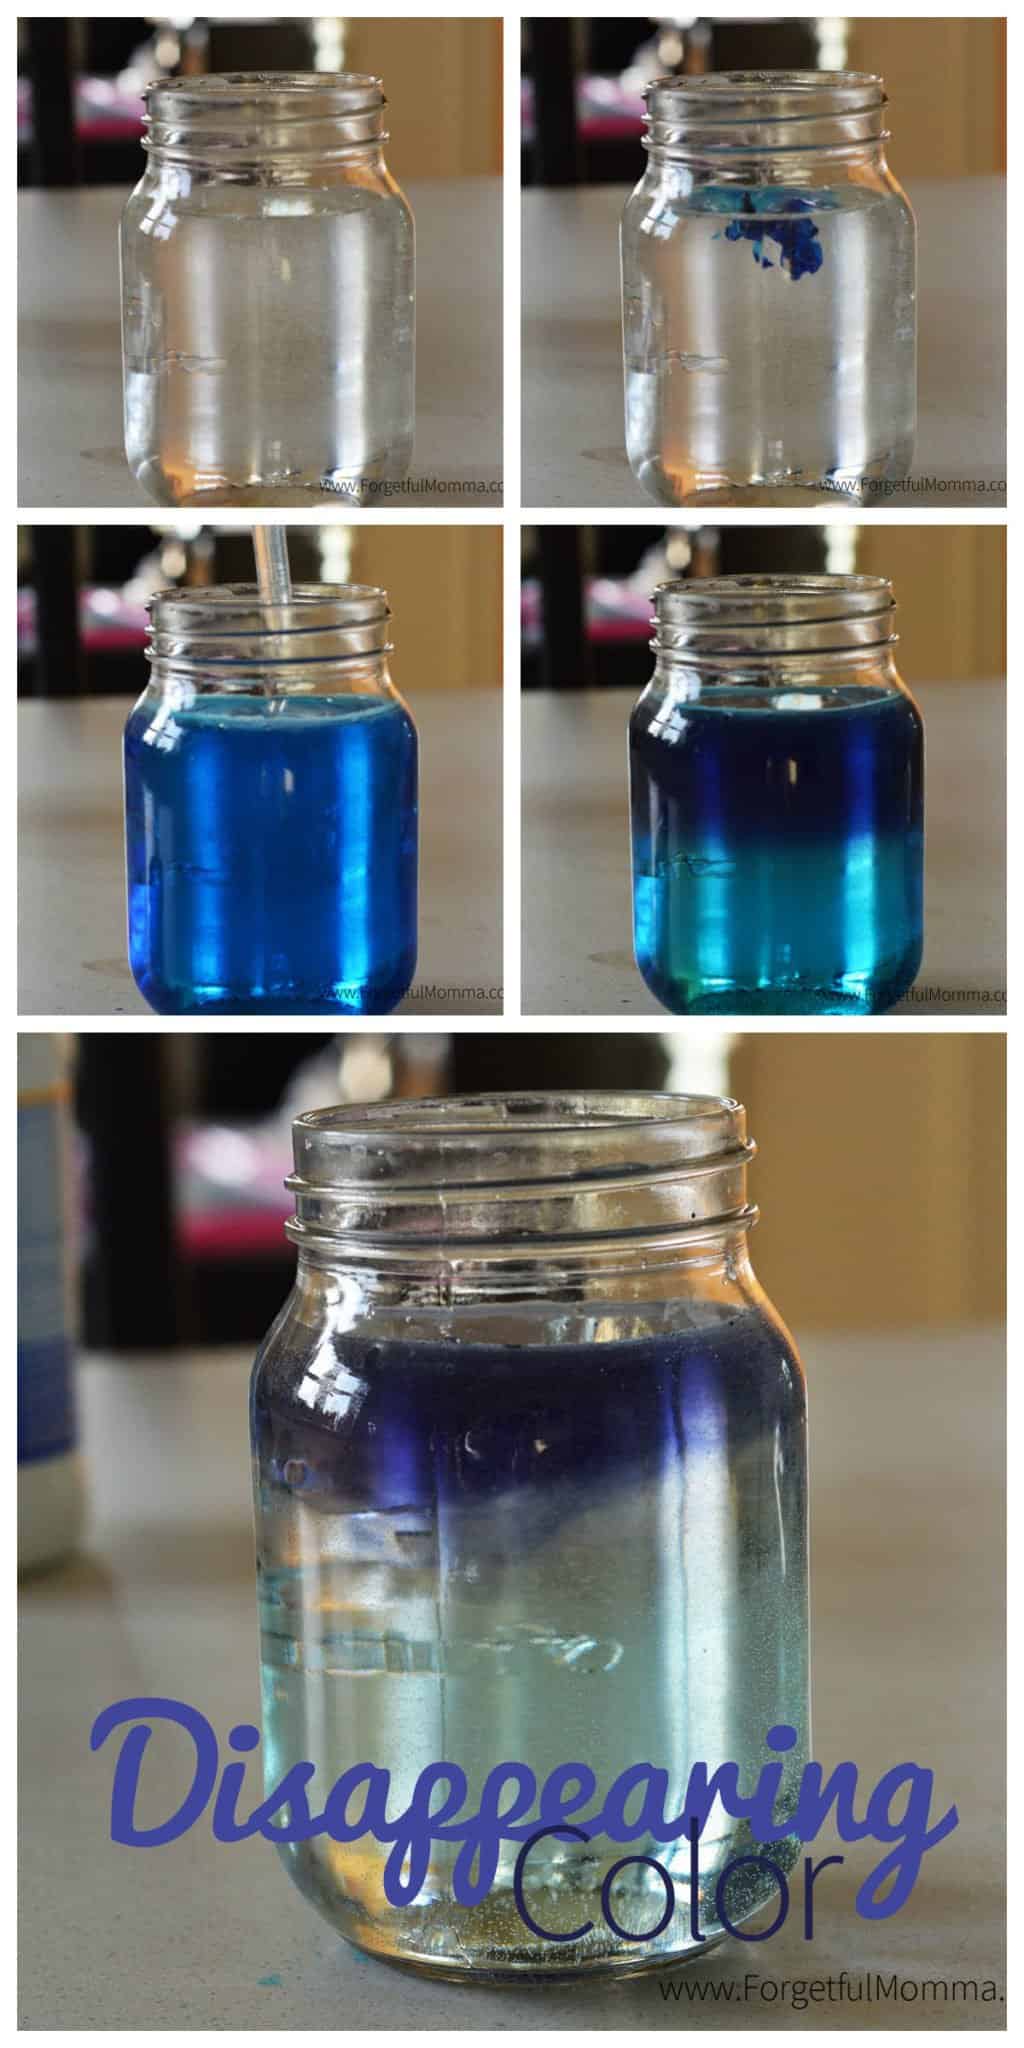 Disappearing Color Science Experiment